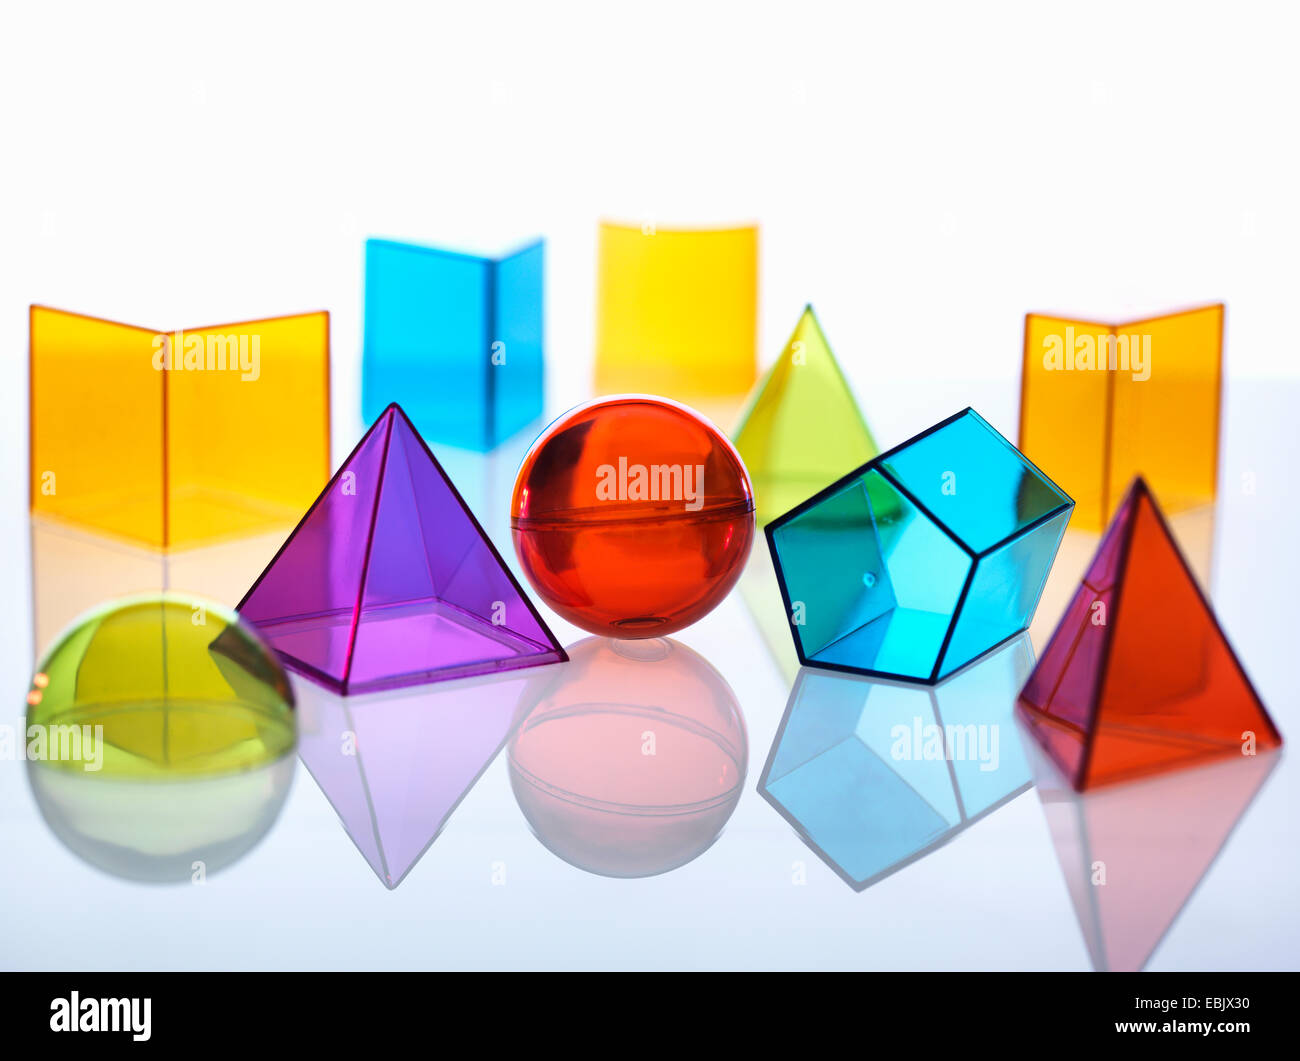 Geometric shapes used in maths and calculus education Stock Photo